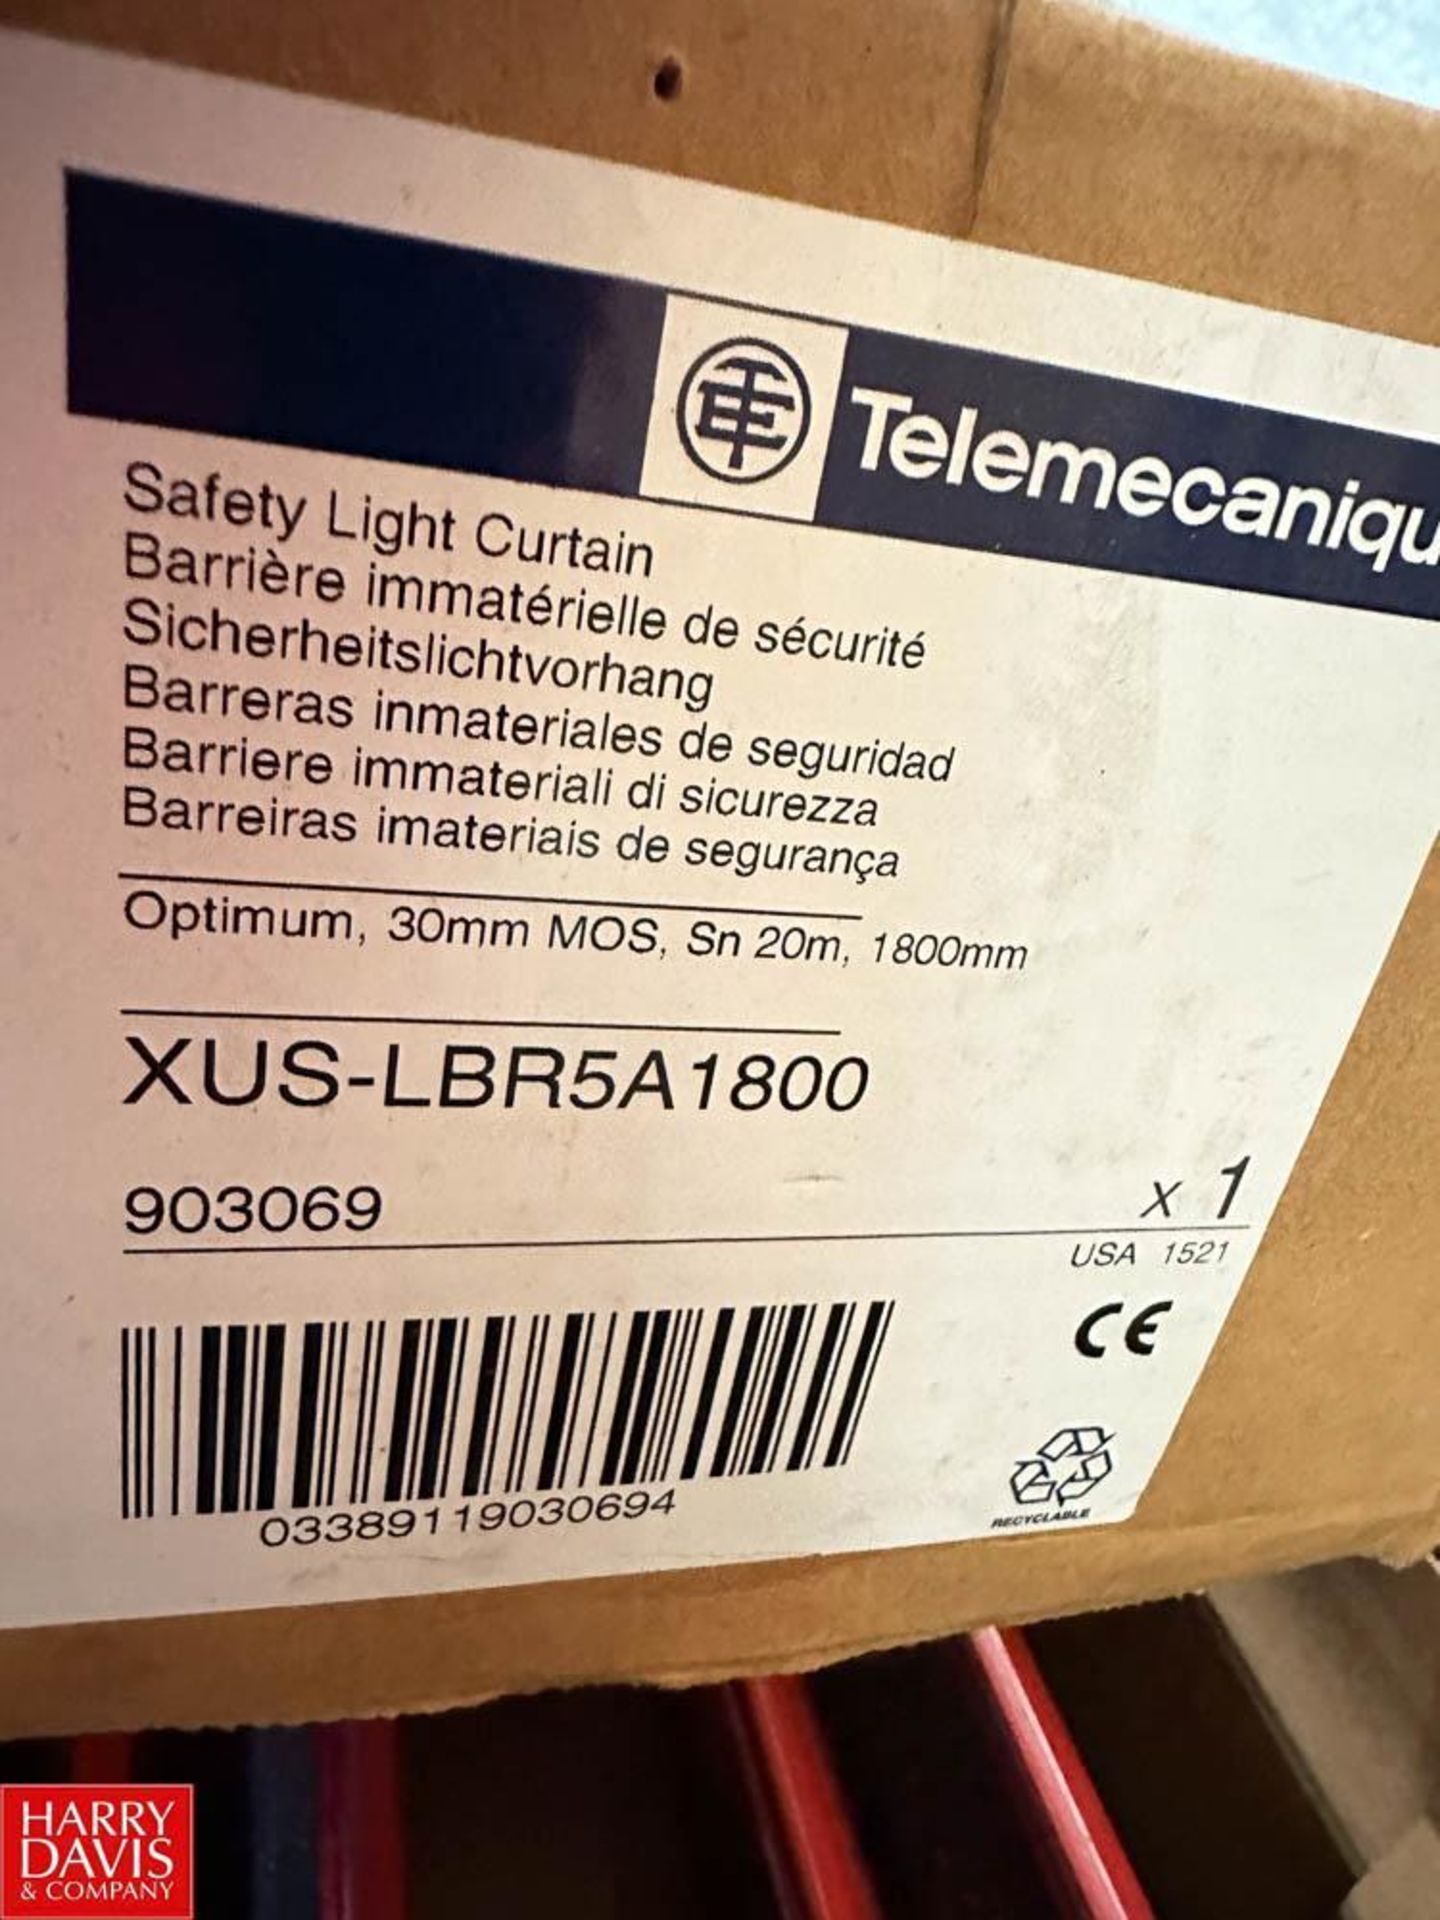 NEW Telemecanique Safety Light Curtain, 30MM-M0S, SN20M, 180 mm - Image 2 of 2